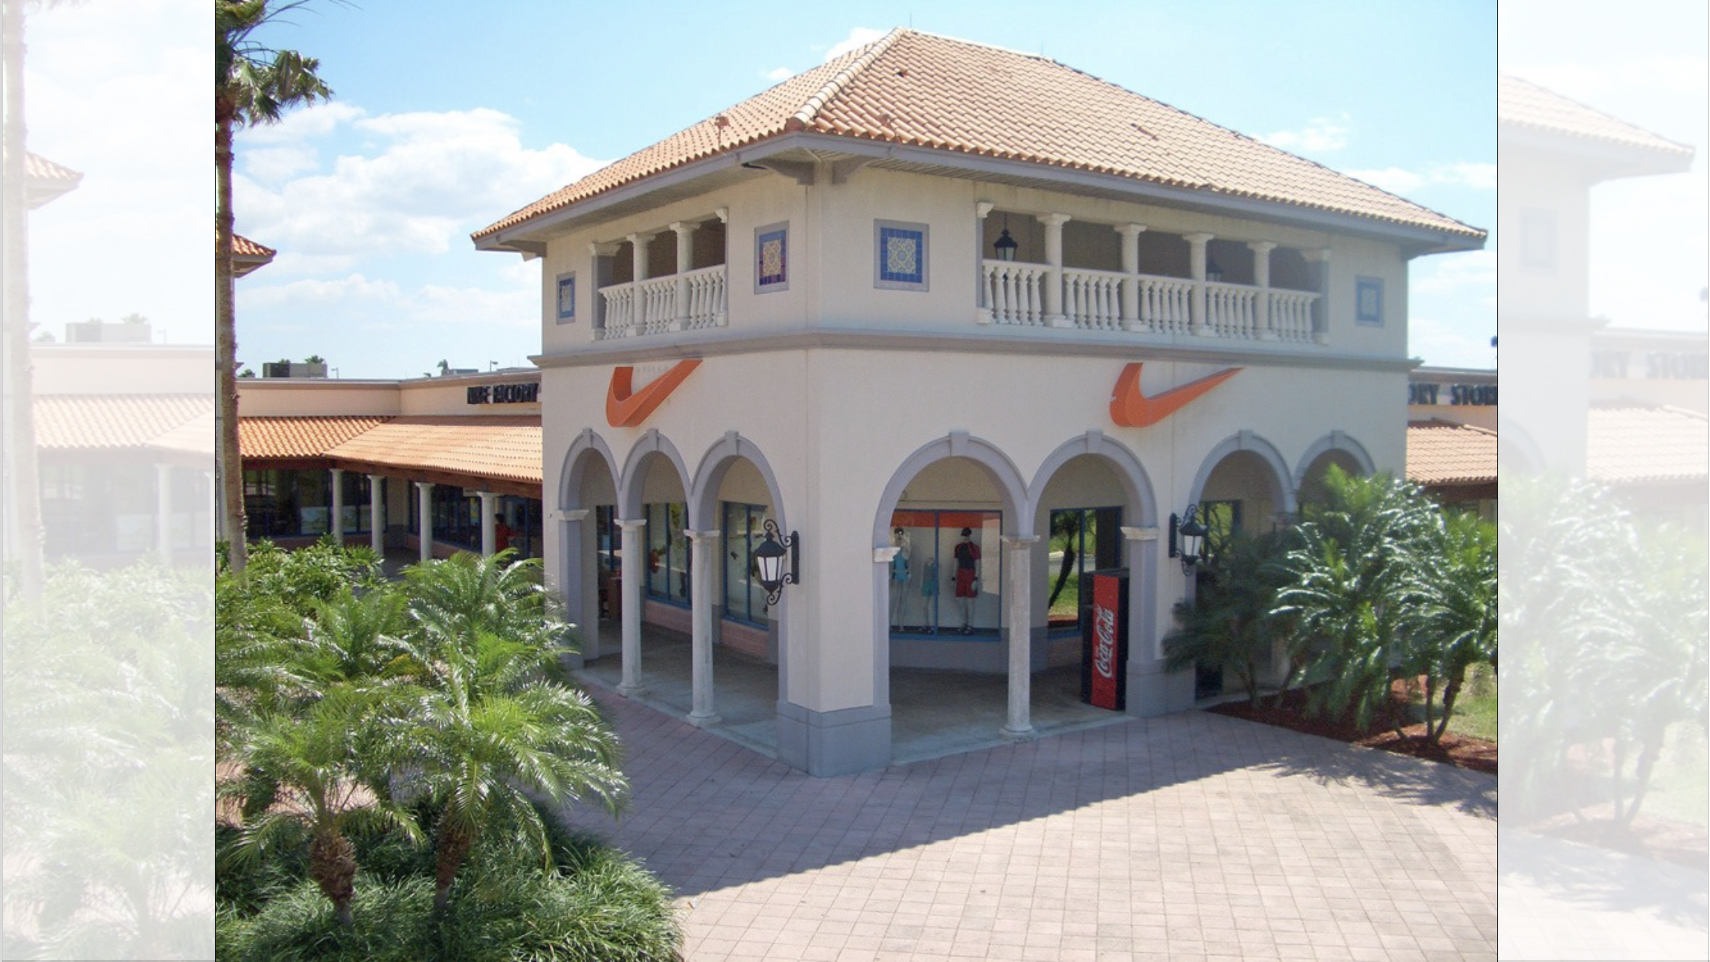 The Florida Keys Outlet is one of the last stops before entering the Florida Keys.  (Florida Keys Outlet Marketplace)